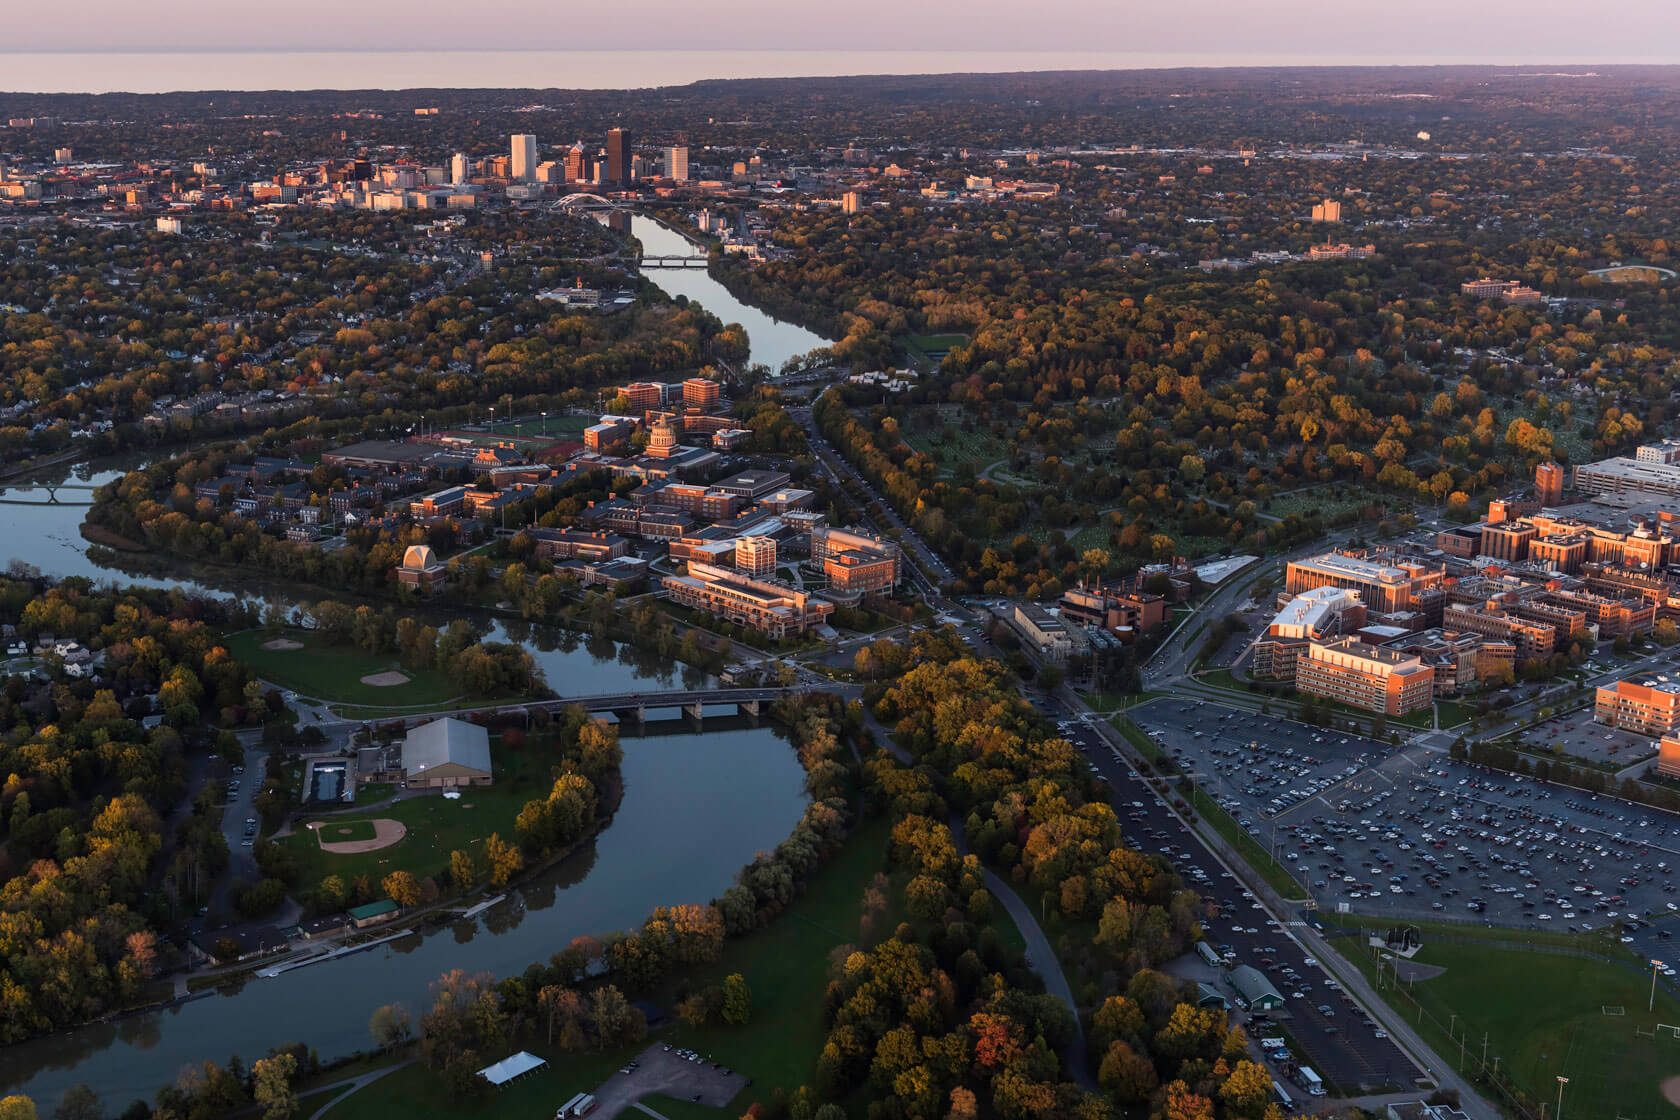 University of Rochester areal view